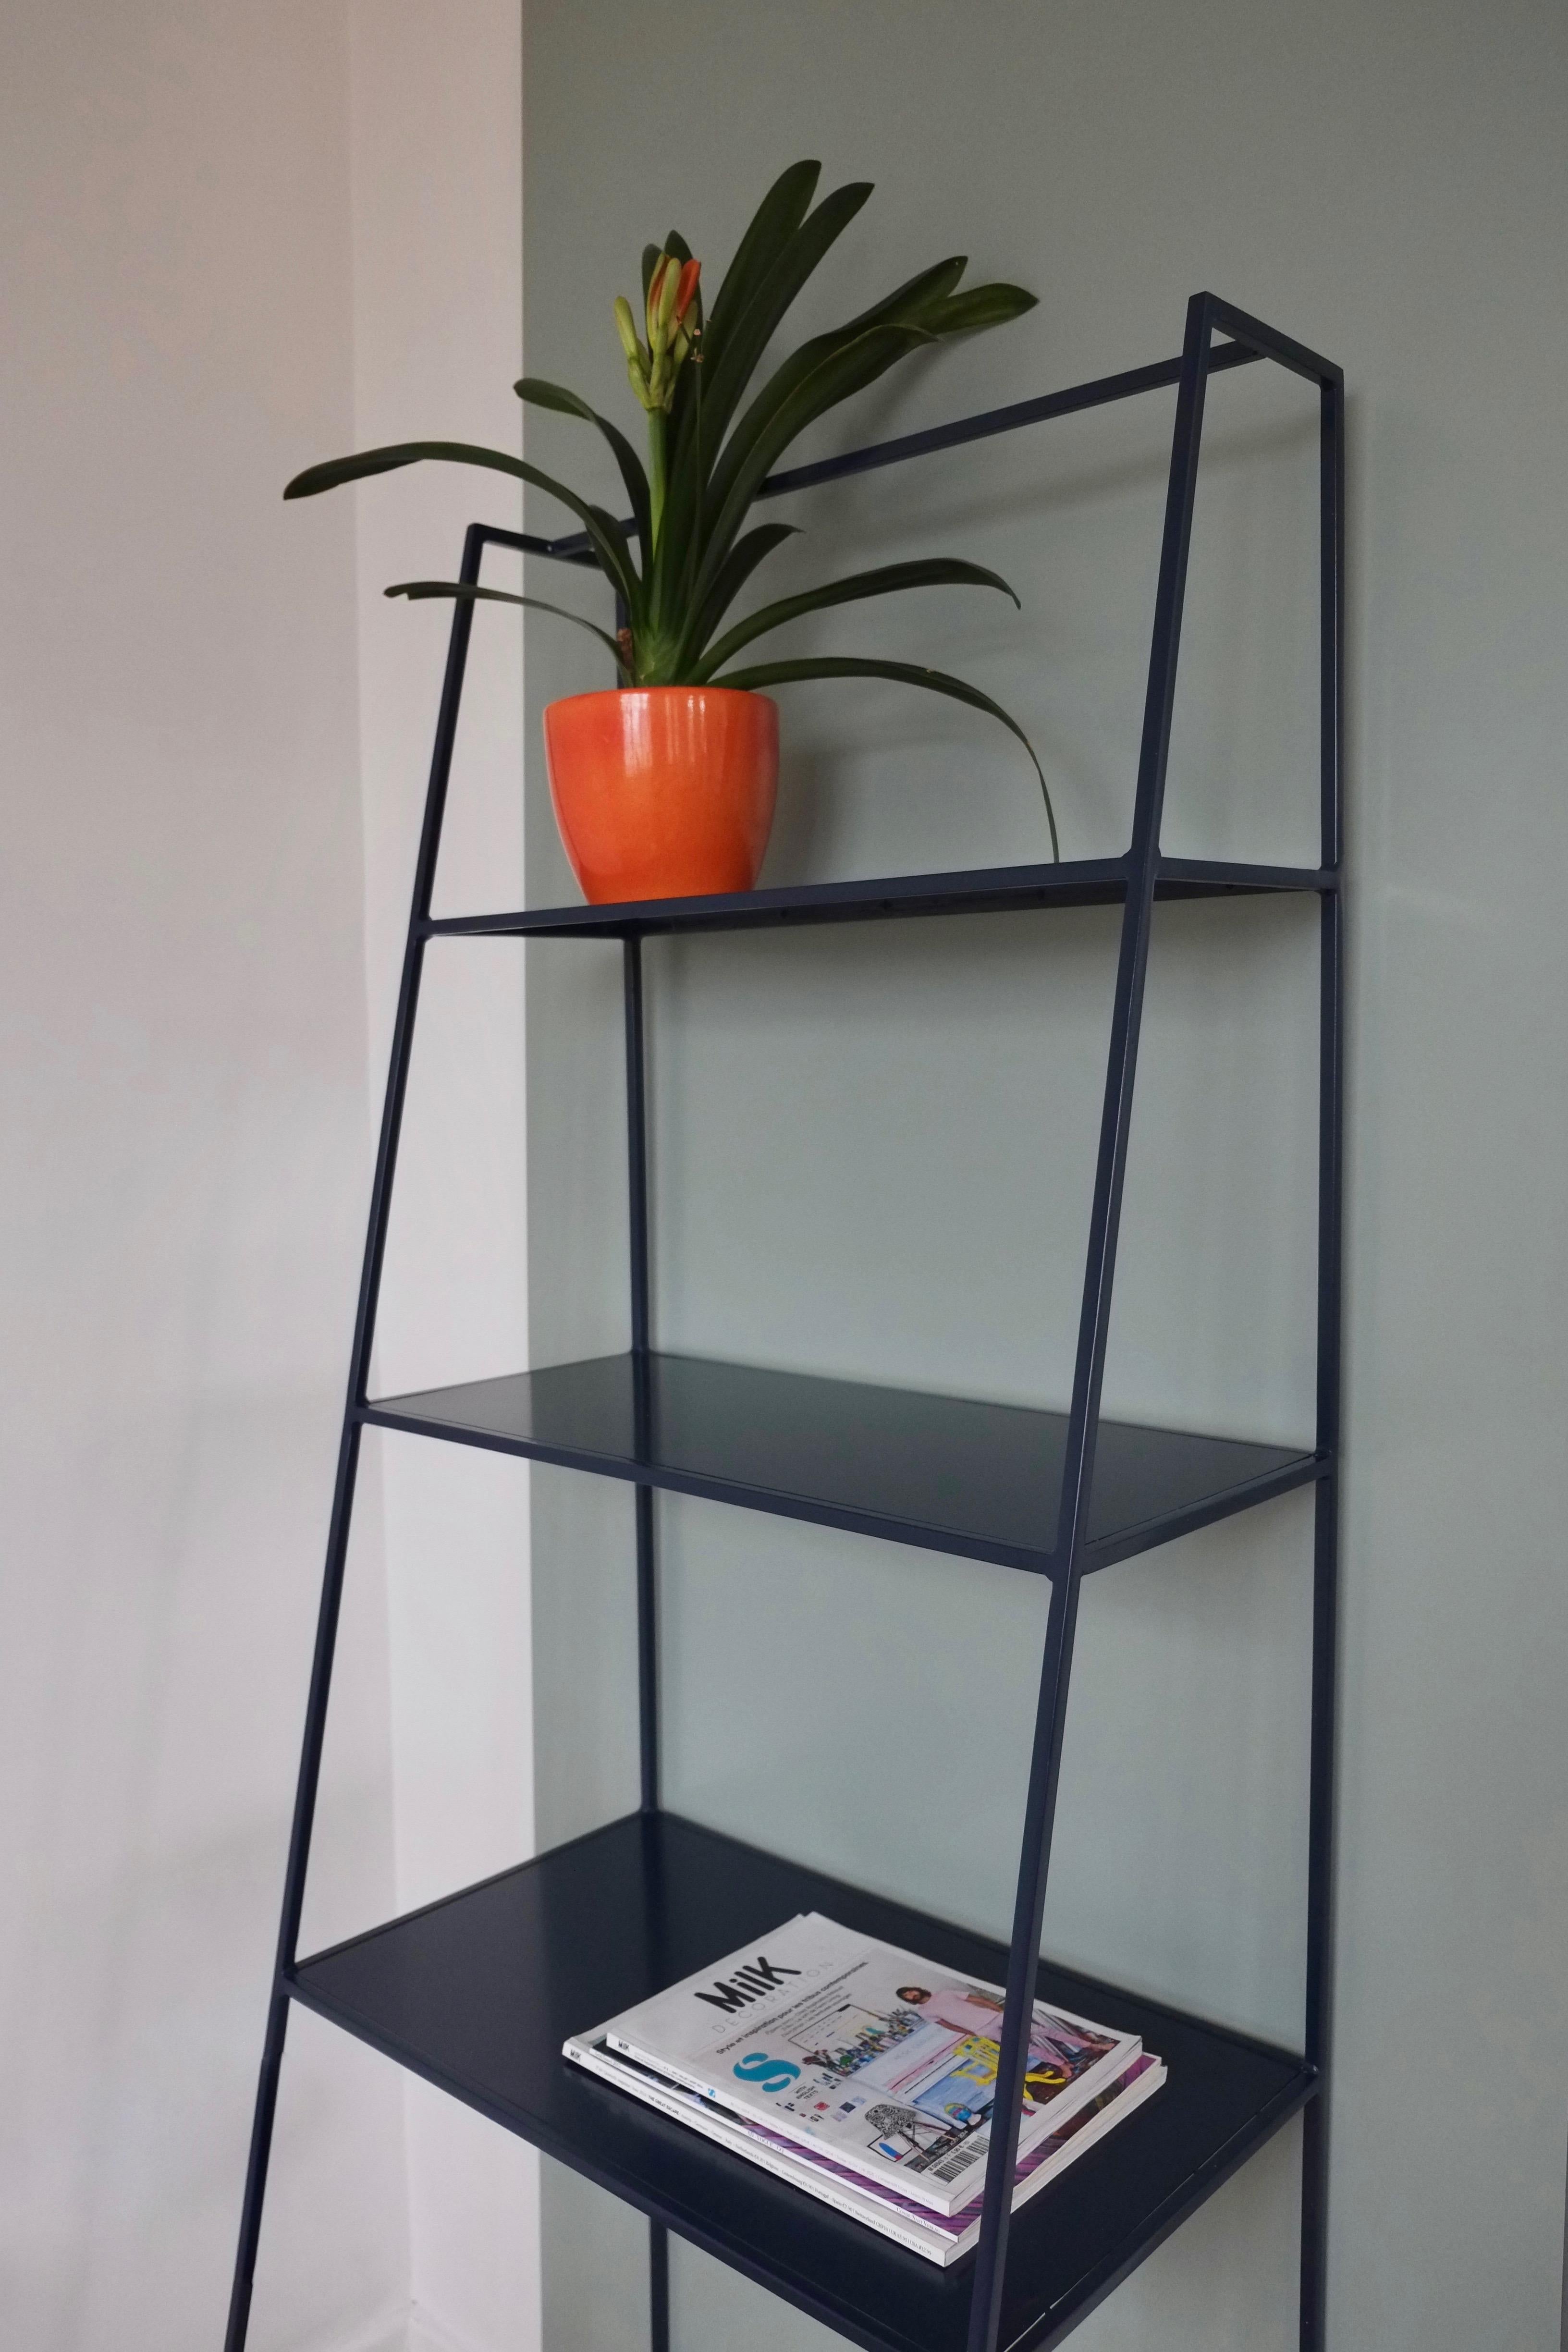 Modern Bookcase Room Divider - Minimal Steel Metal Shelving In New Condition For Sale In Leicester, GB